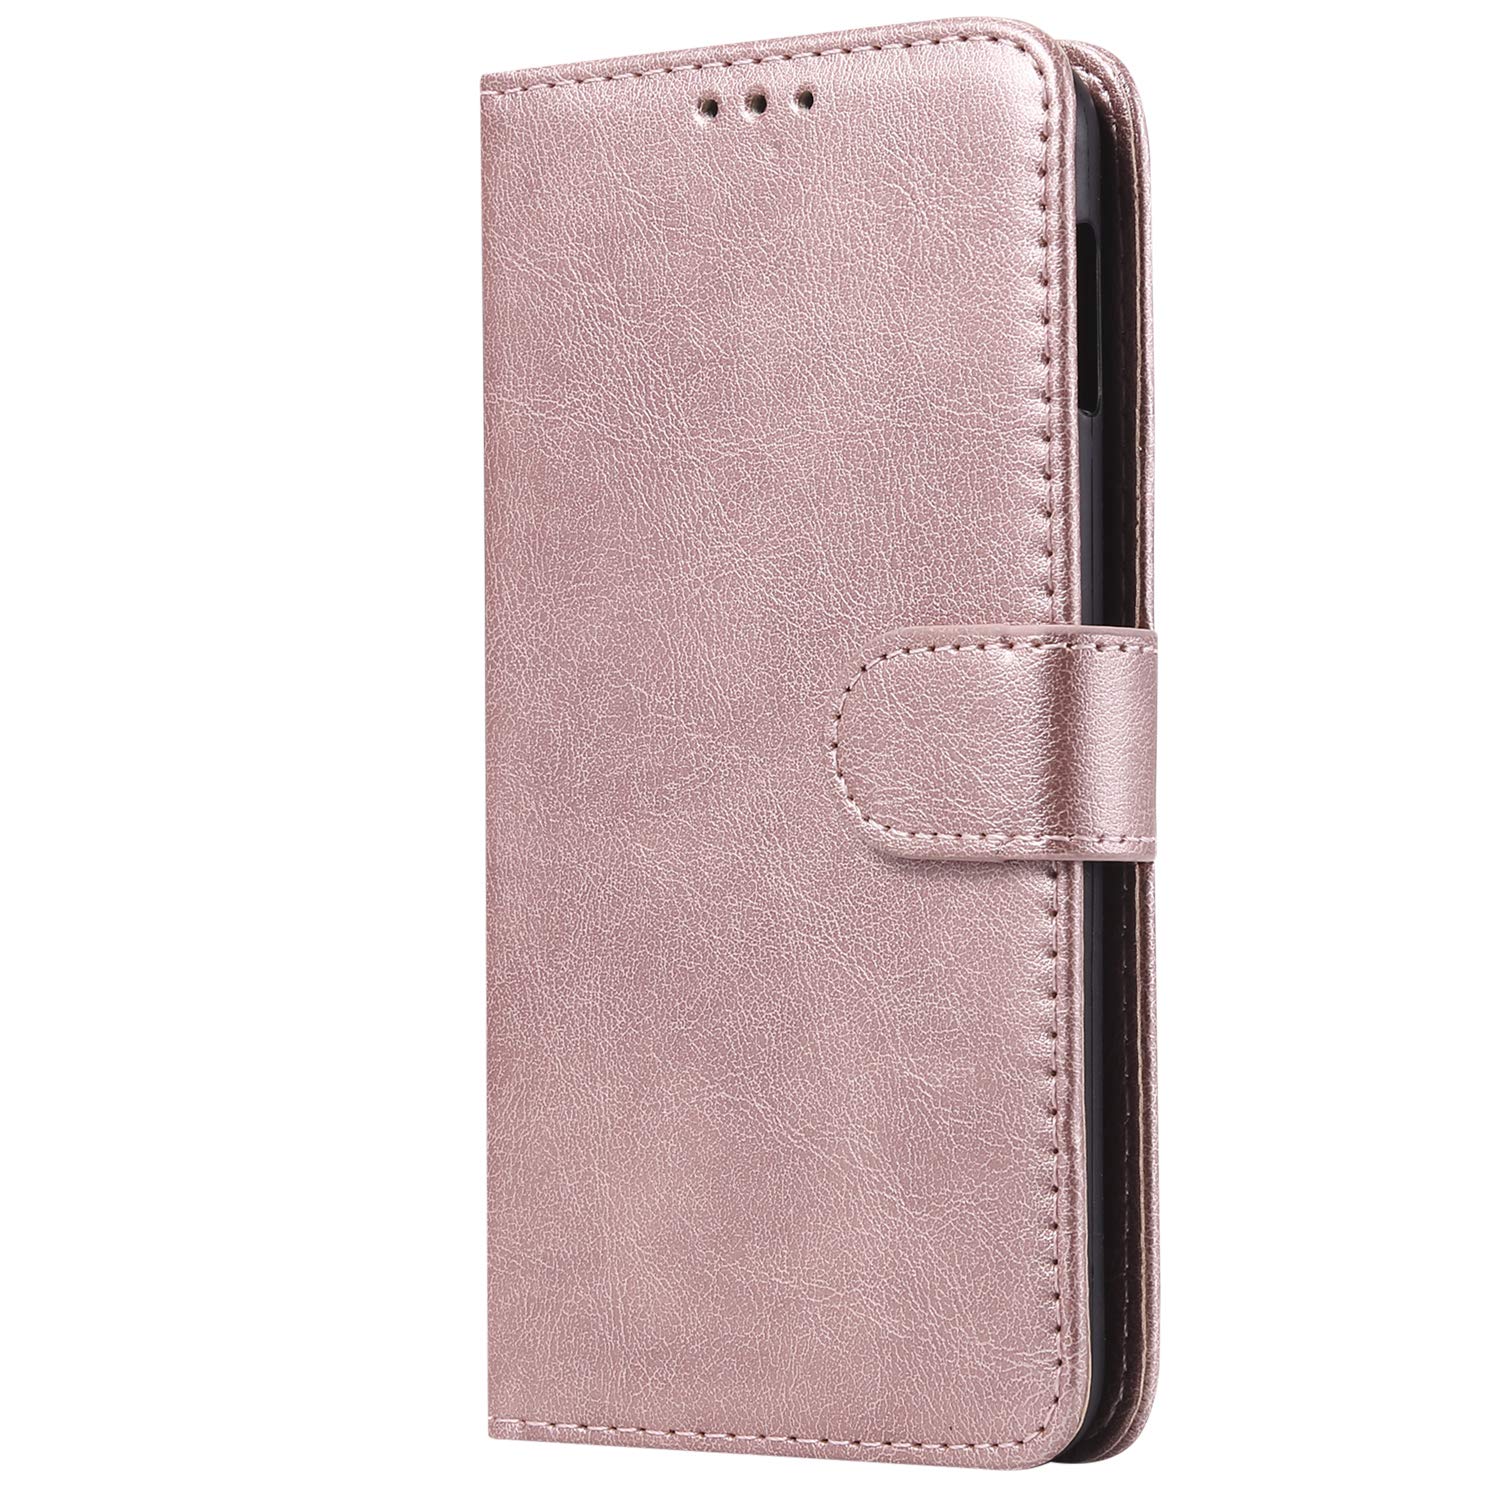 Rose wallet folio case protector for Samsung Galaxy S10 Plus cell phones